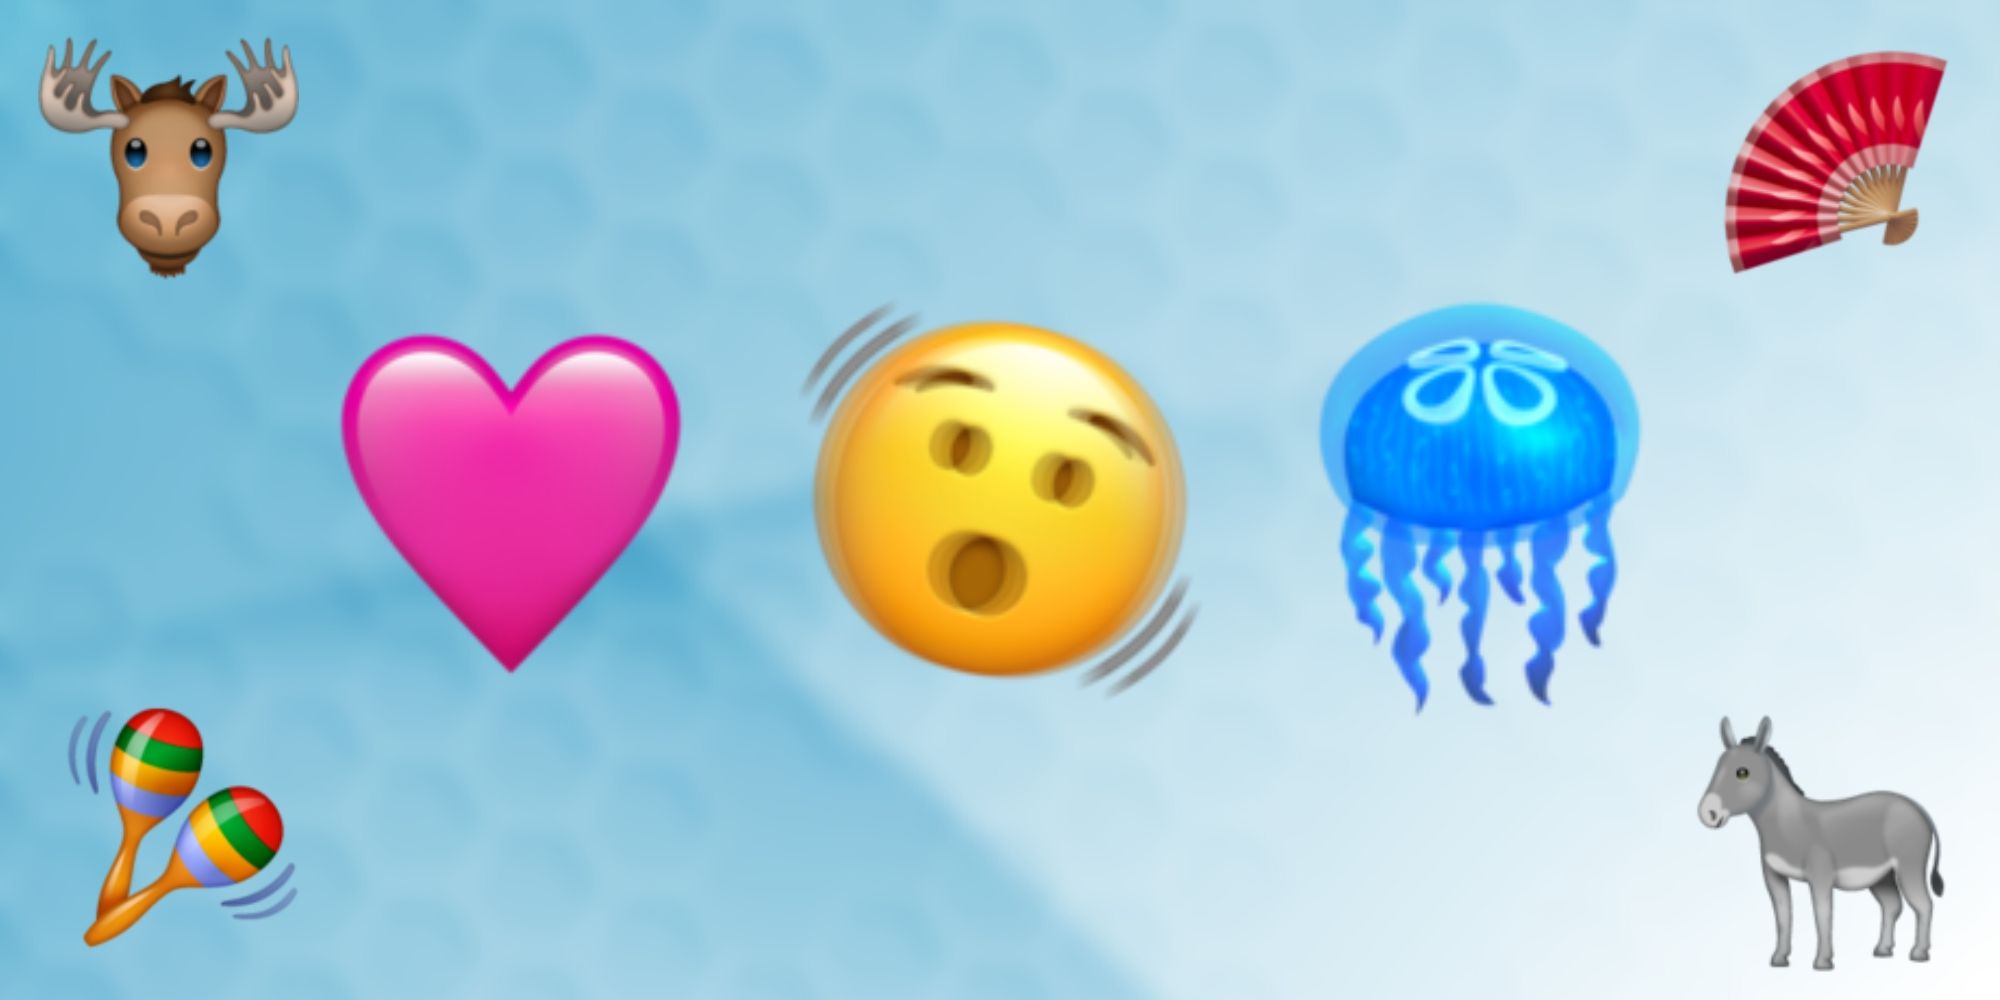 Representation of new emojis added to Android and iOS in 2023